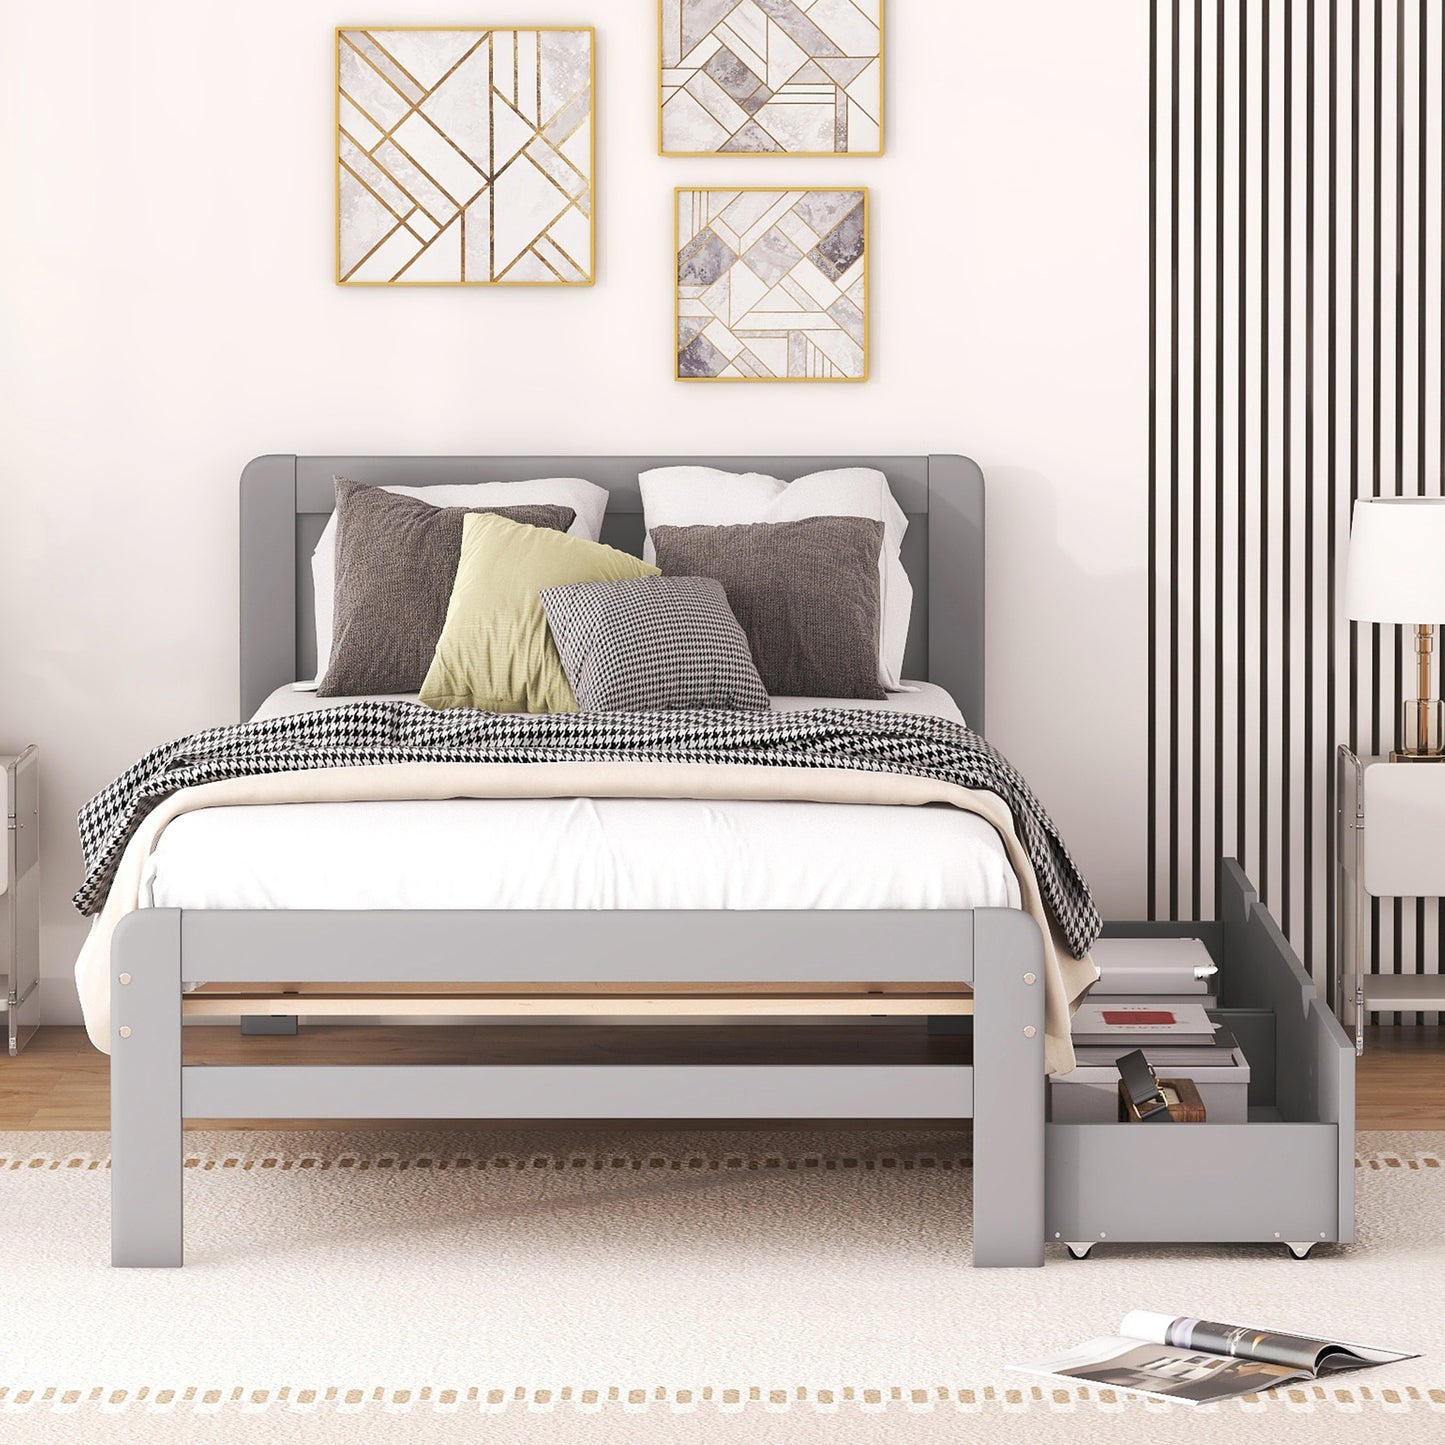 Modern Design Twin Size Platform Bed Frame with 2 Drawers for Grey Color